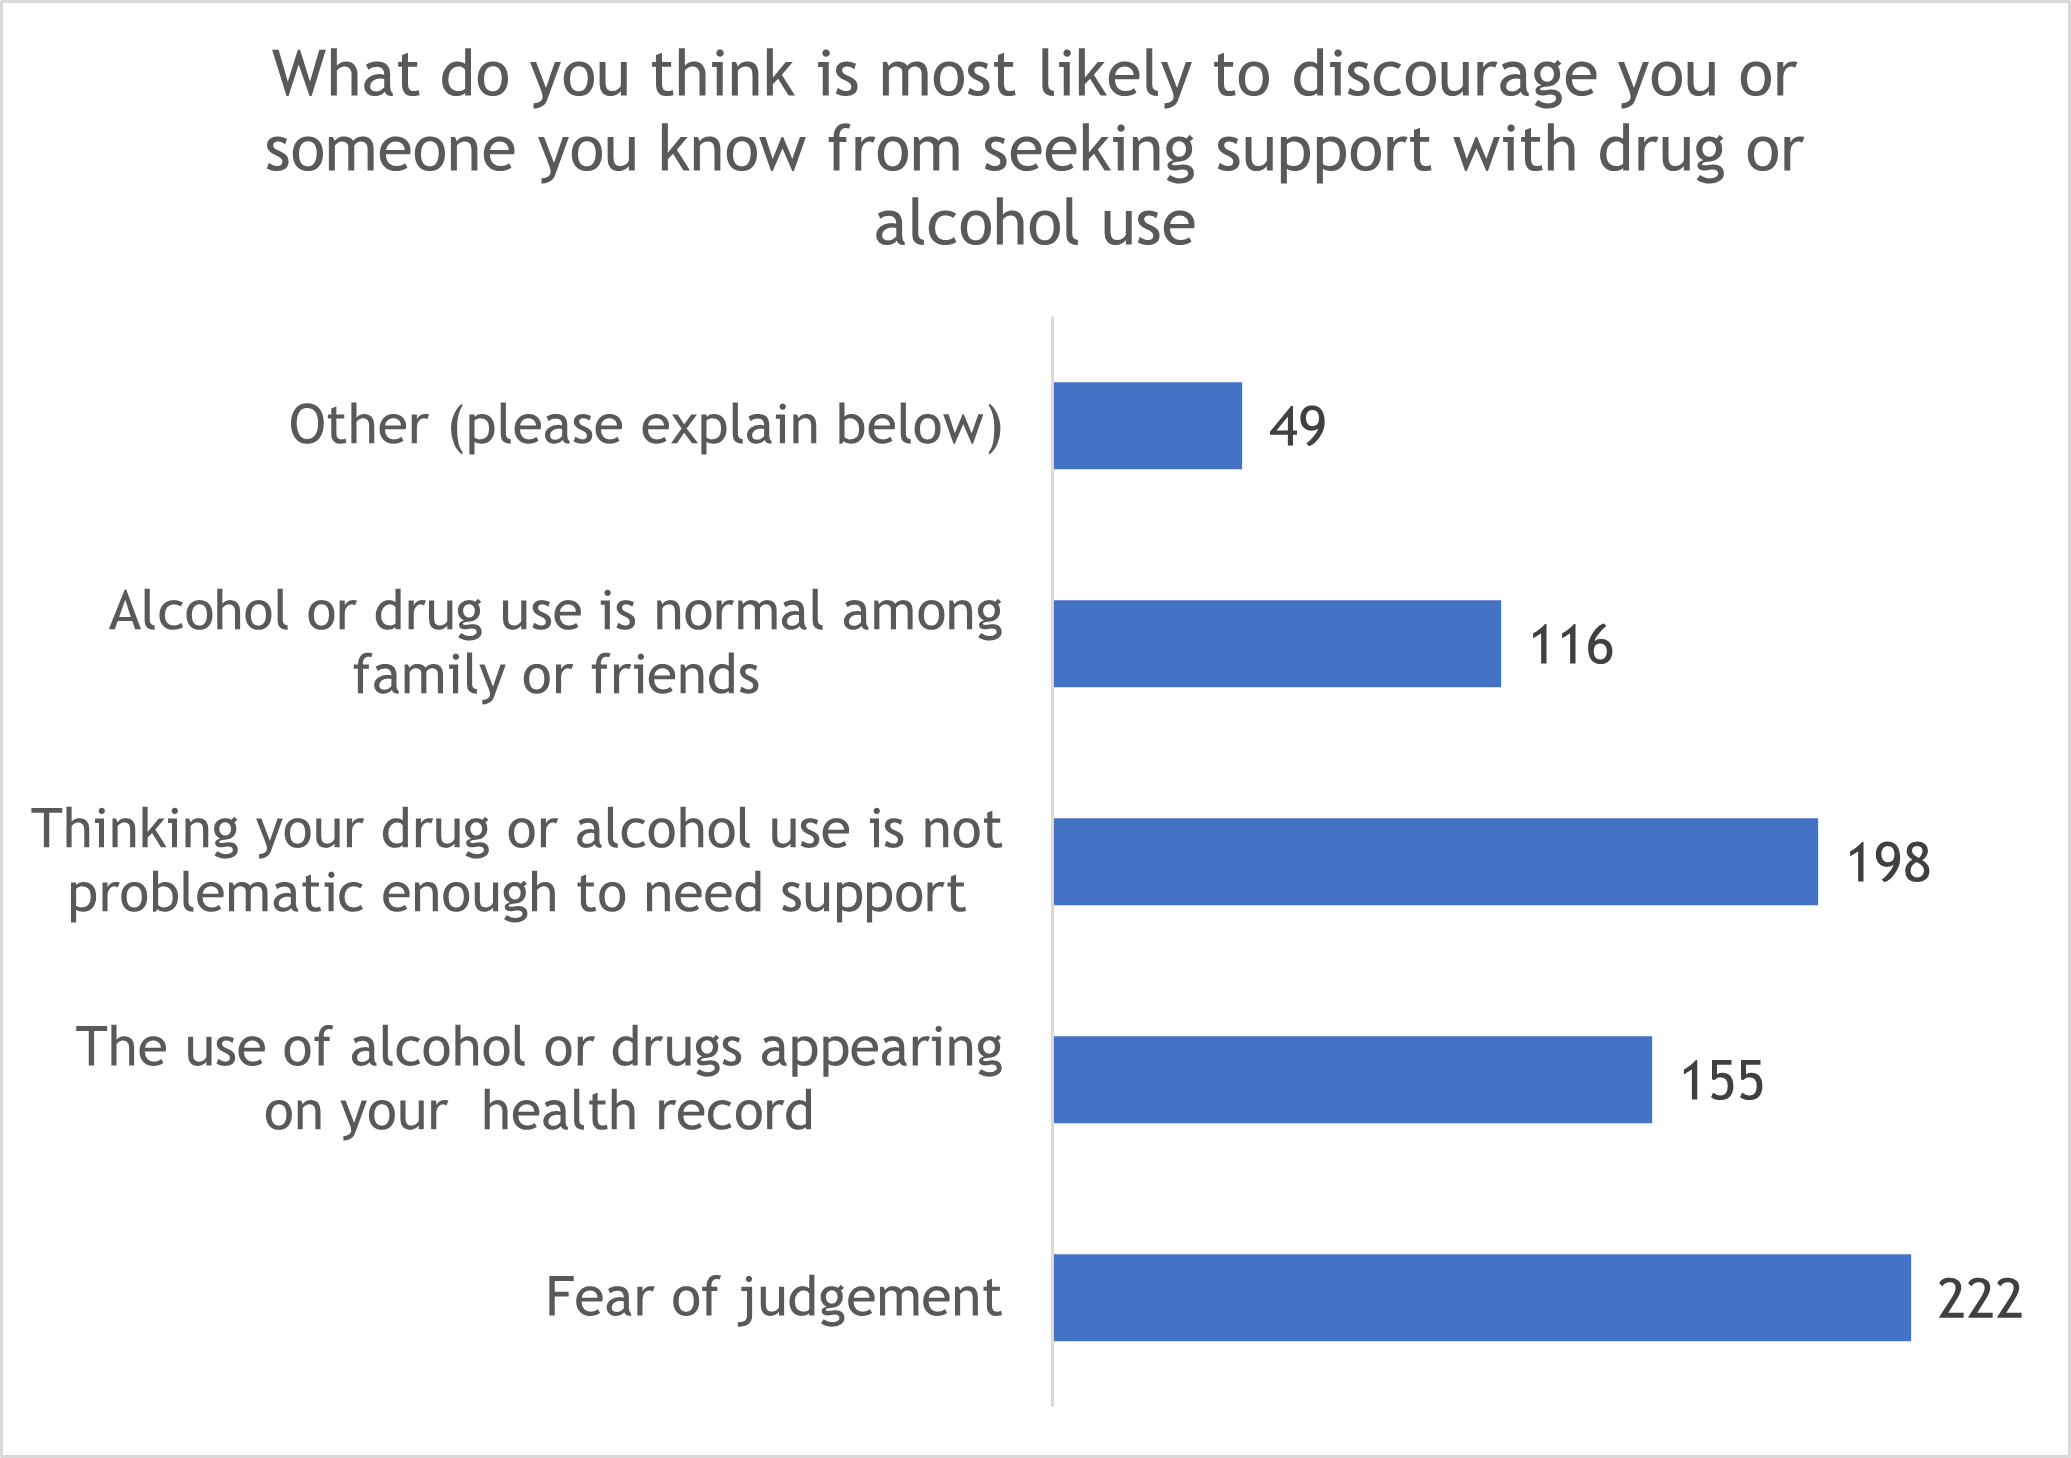 Chart to show what respondents thing is most likely to discourage them or someone they know from seeking support with drug or alcohol use.  Fear of judgement, 222. The use of alcohol or drugs appearing on your health record, 155. Thinking your drug or alcohol use is not problematic enough to need support, 198. Alcohol or drug use is normal among family or friends, 116. Other, 49. 